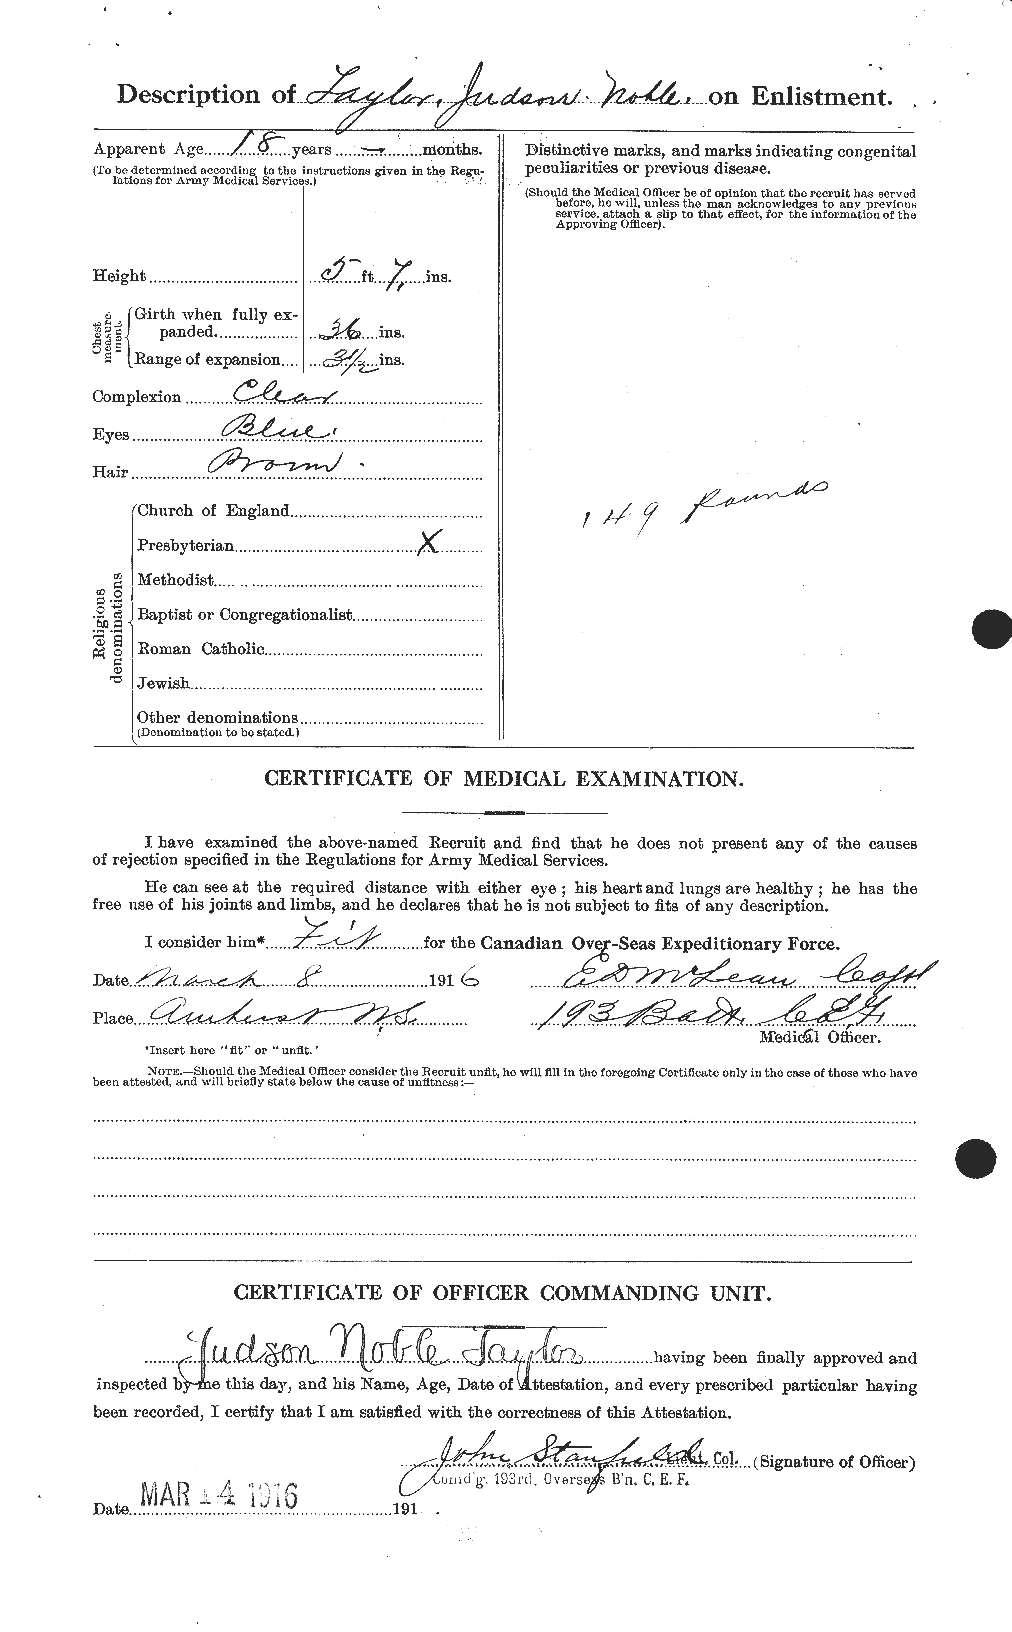 Personnel Records of the First World War - CEF 627592b